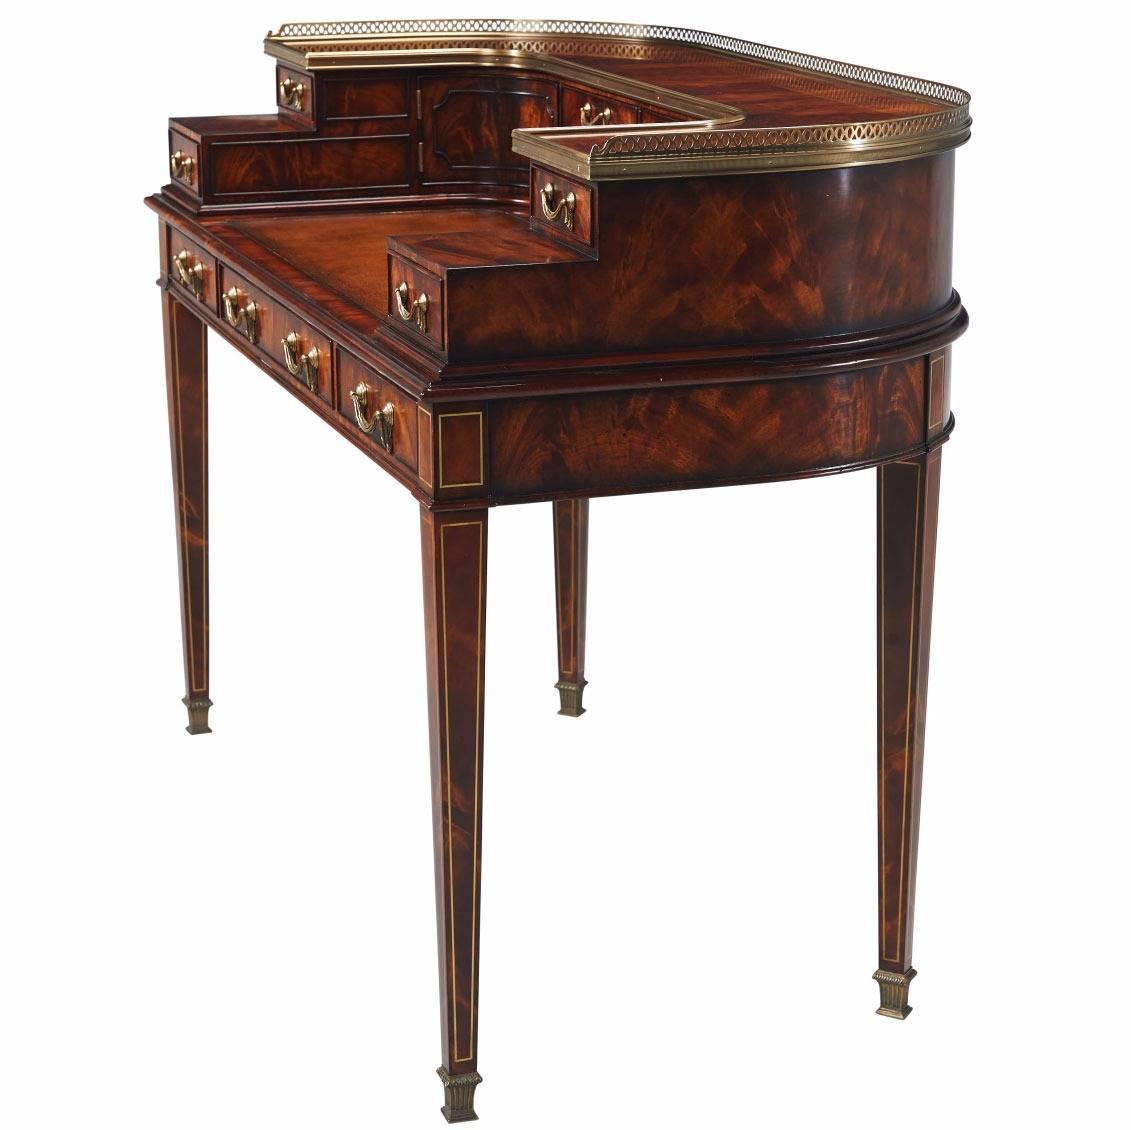 Regency style Carlton desk in finest crotch mahogany veneers with 11 oak lined drawers and two shaped cupboards. Solid brass handles and gallery and hand tooled hide writing surface.